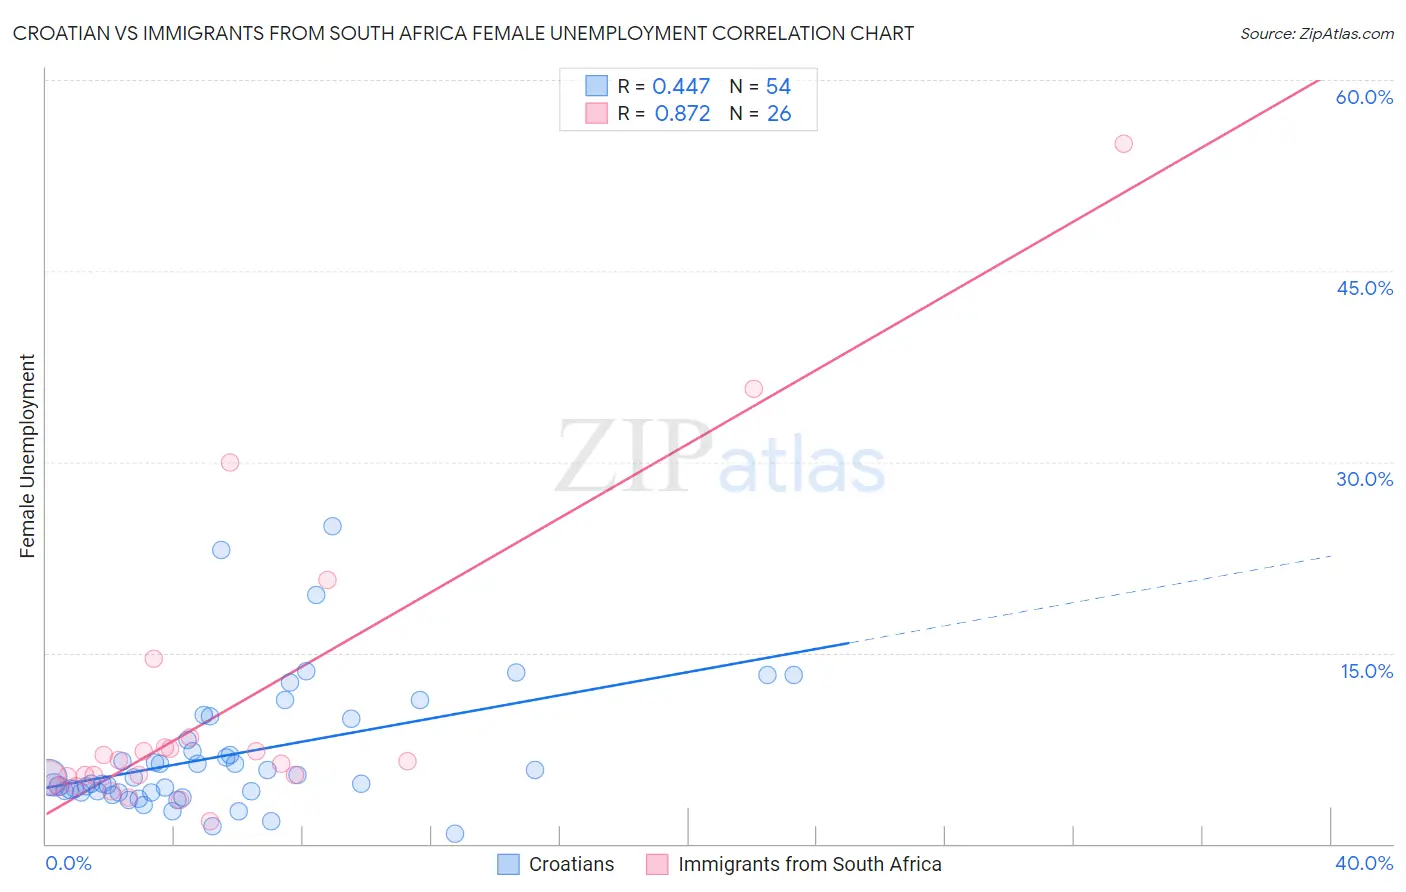 Croatian vs Immigrants from South Africa Female Unemployment